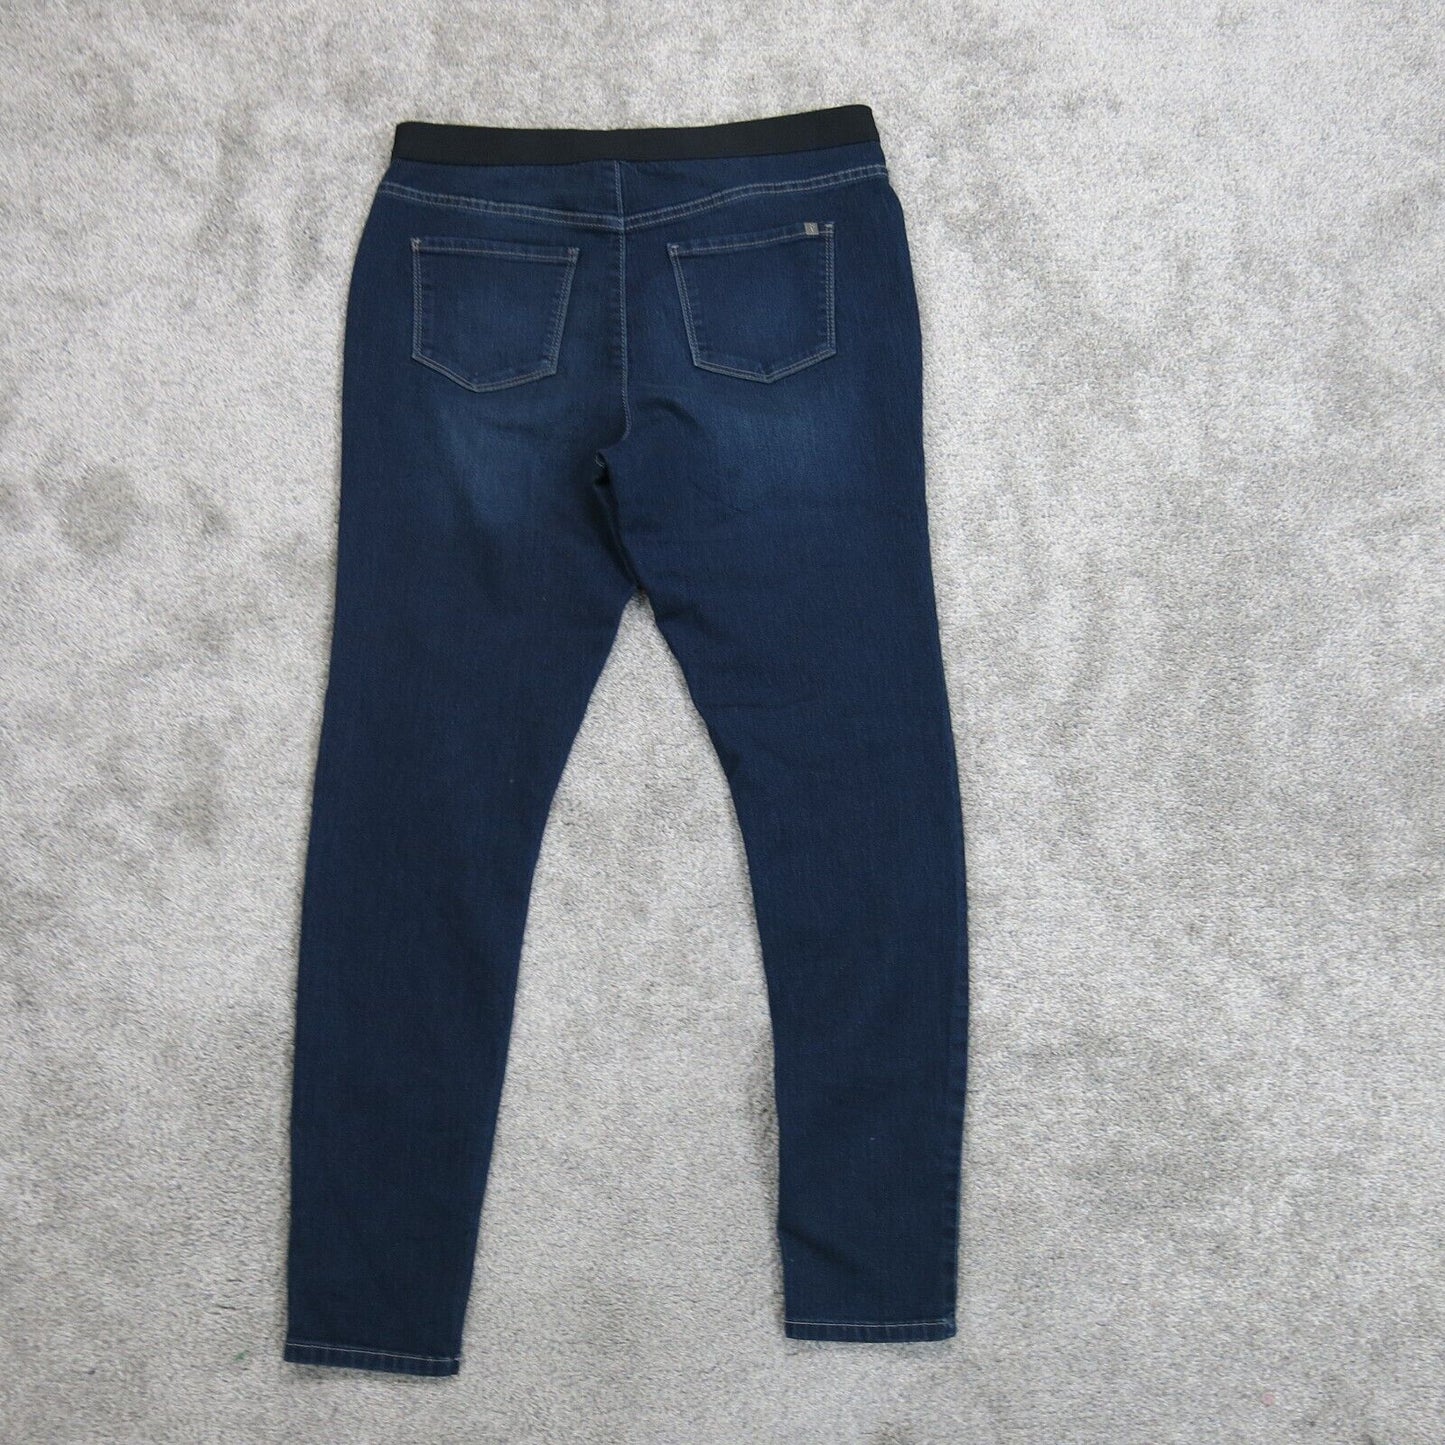 Simply Vera Wang Skinny Jeans Womens Size 10 Mid Rise Stretch Dark Blue  Wash